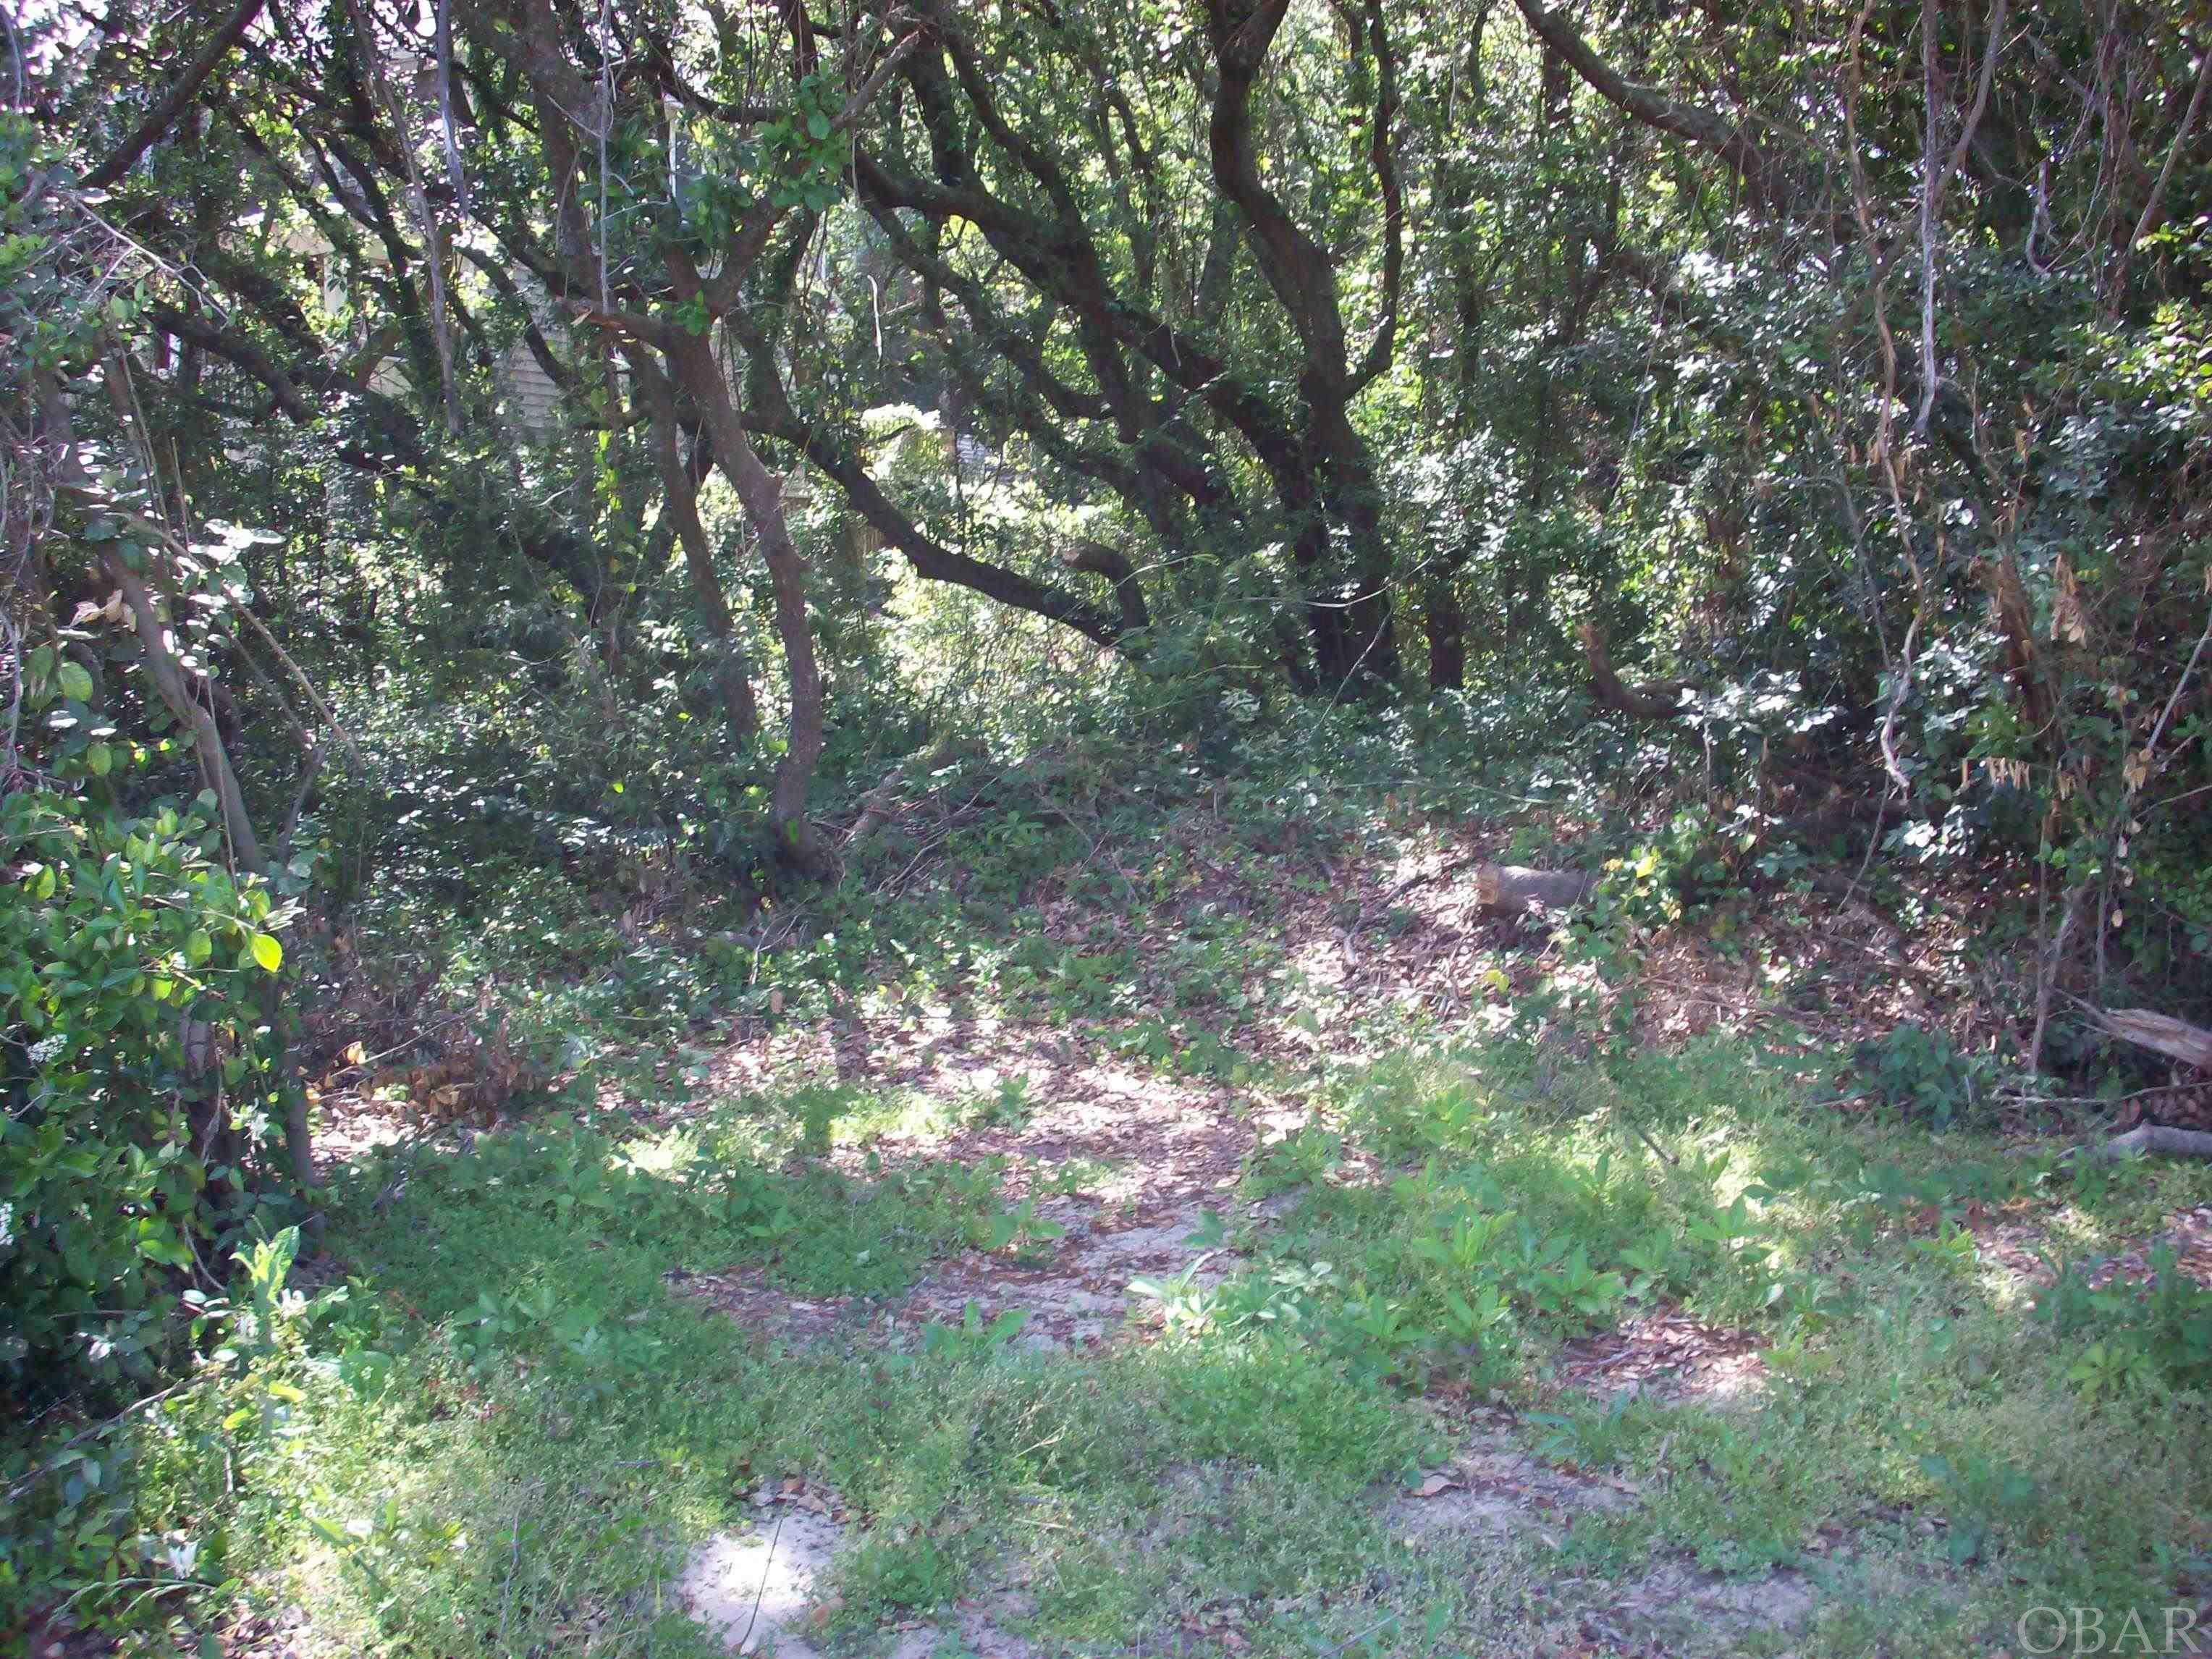 good size lot in the Cove, Remove tree growth required to build and enjoy surrounding growth and privacy.